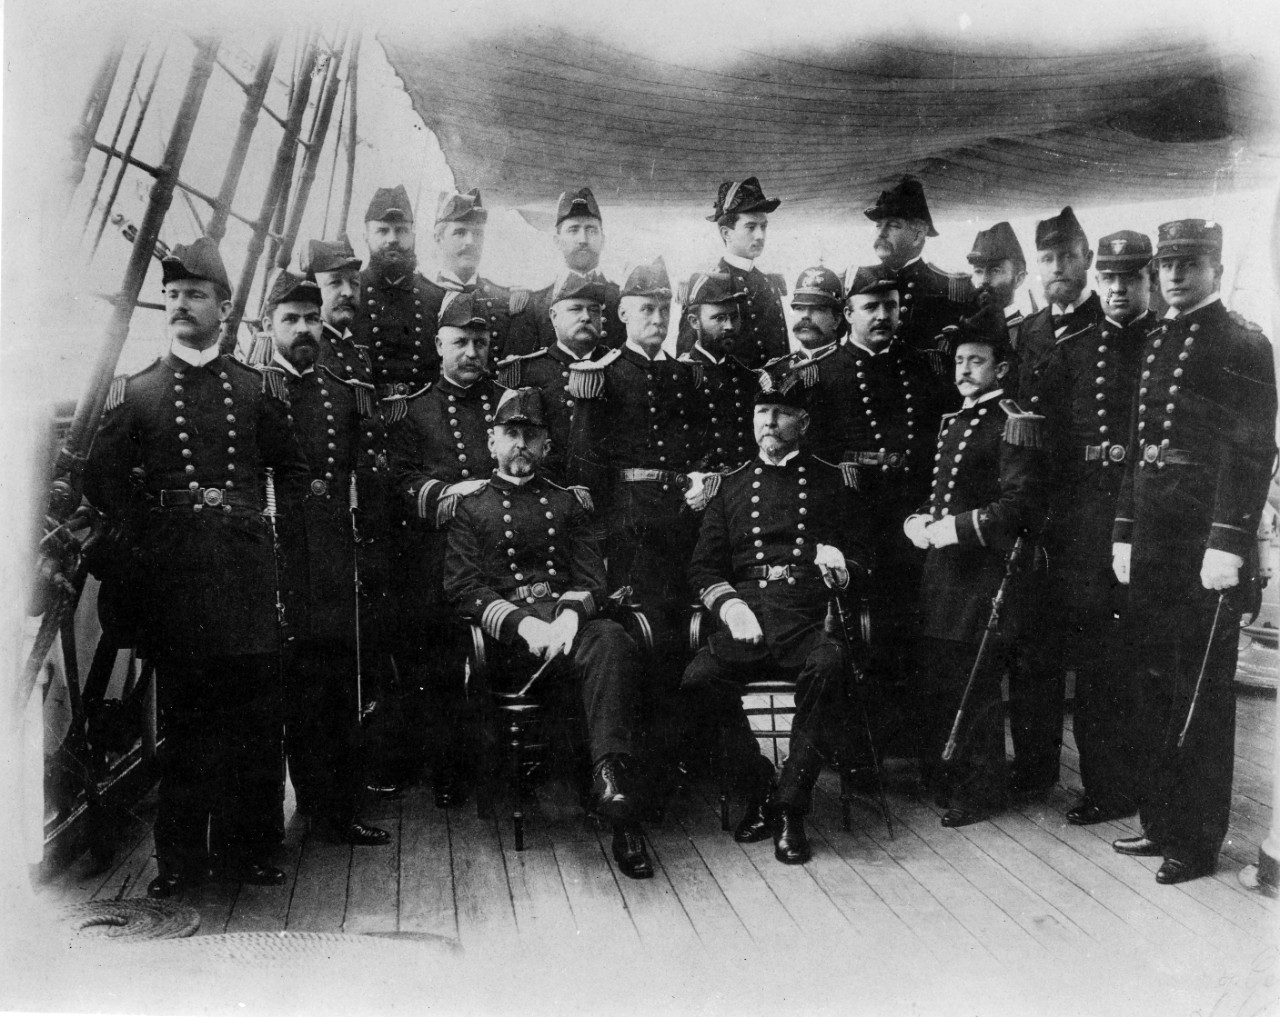 Officers of USS Chicago (protected cruiser) circa 1893-1895. Captain Alfred T. Mahan is sitting at left, Ensign William A. Moffett is at his left. Image is from the collection of CAPT Bruce Canaga. 